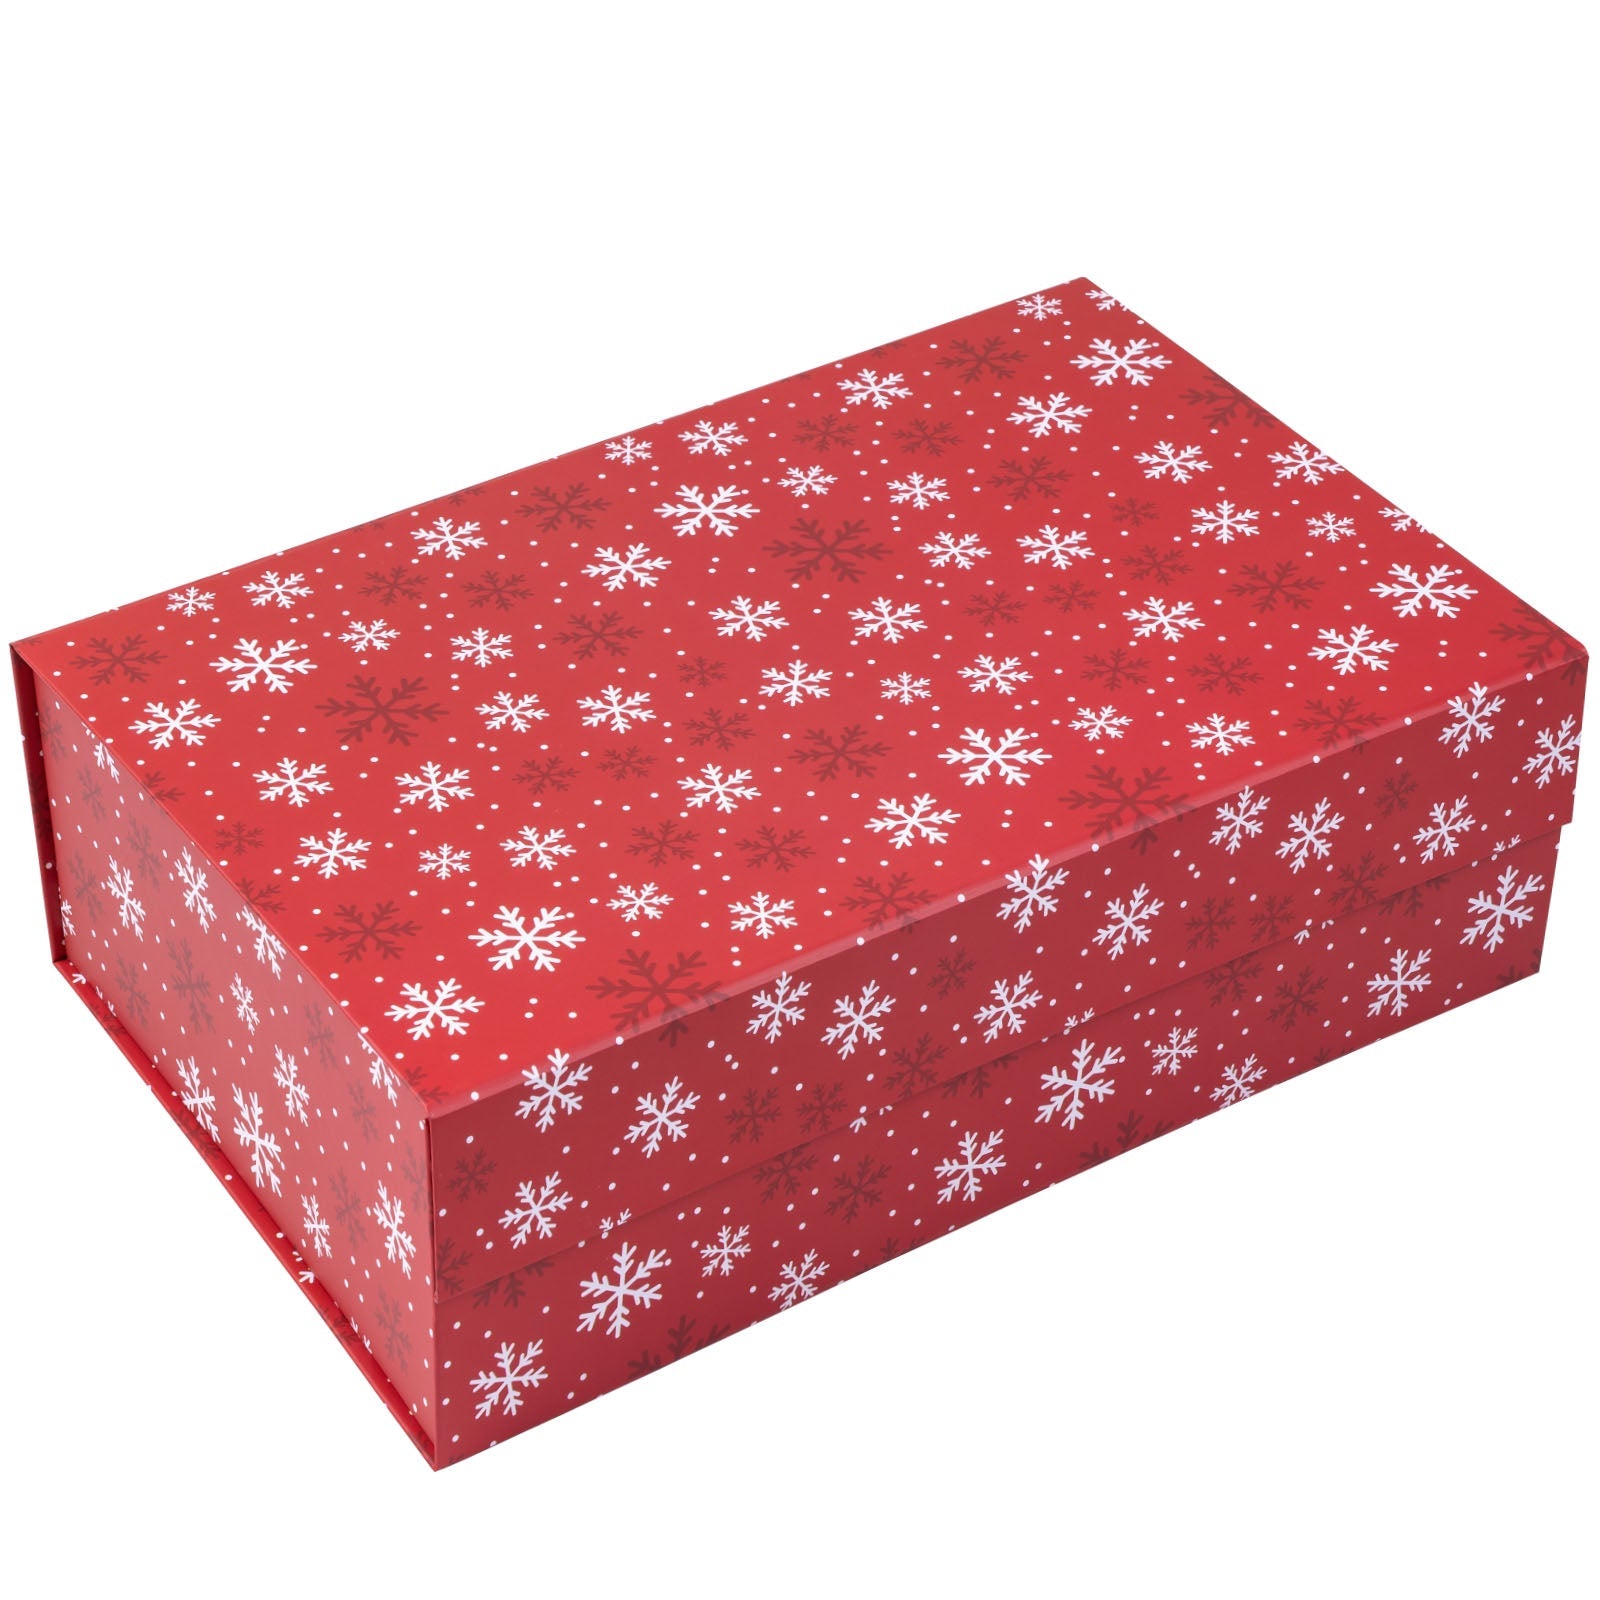 14x9x4.3 inch Collapsible Gift Box with Magnetic Closure - Snow Flake Red